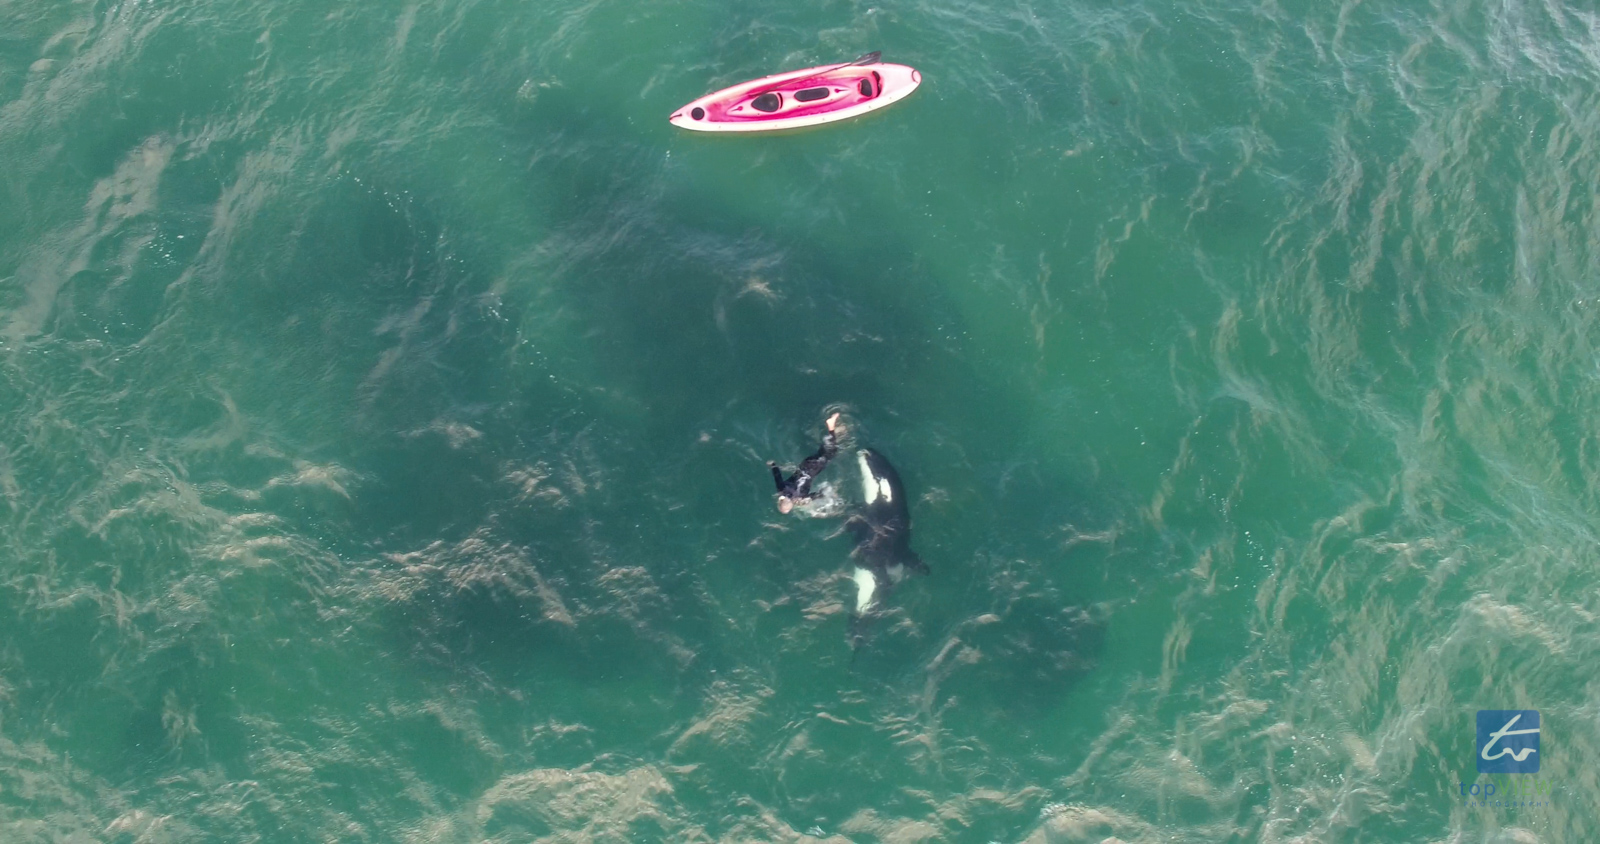 Orca with Kayaker / snorkeler in Army Bay, Auckland, New Zealand